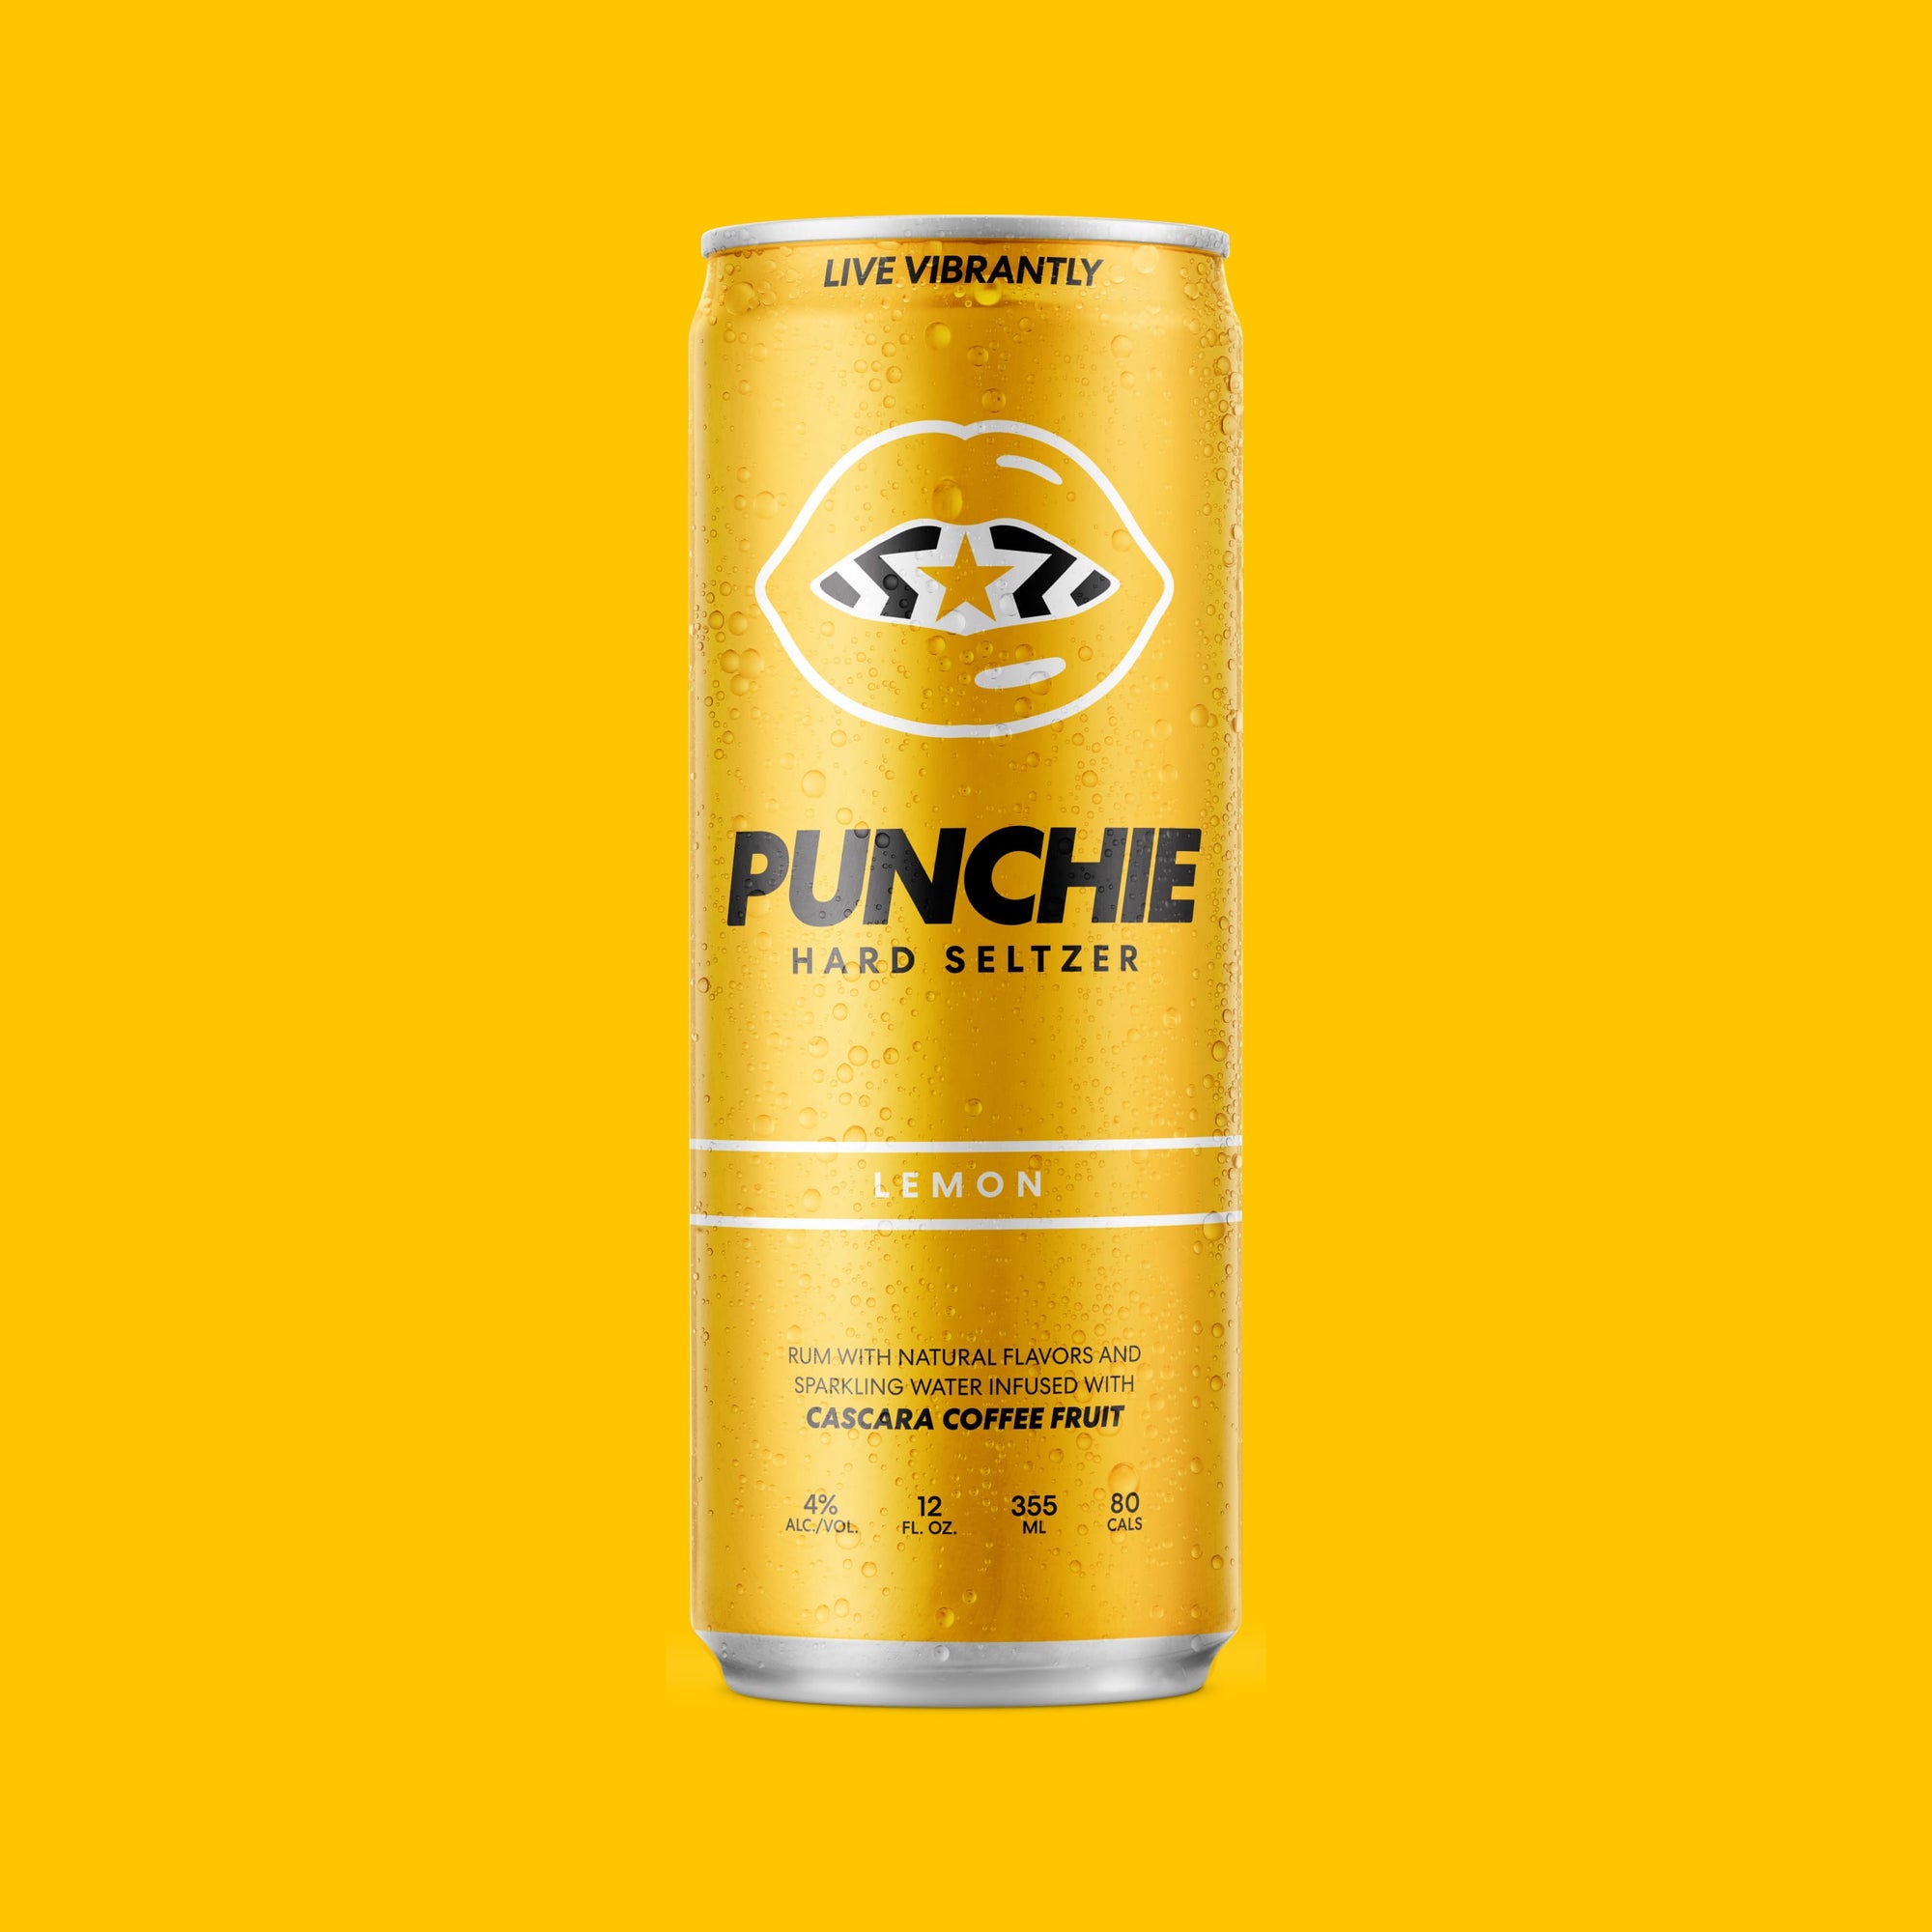 PUNCHIE Variety Packs Bundle (24 Cans)